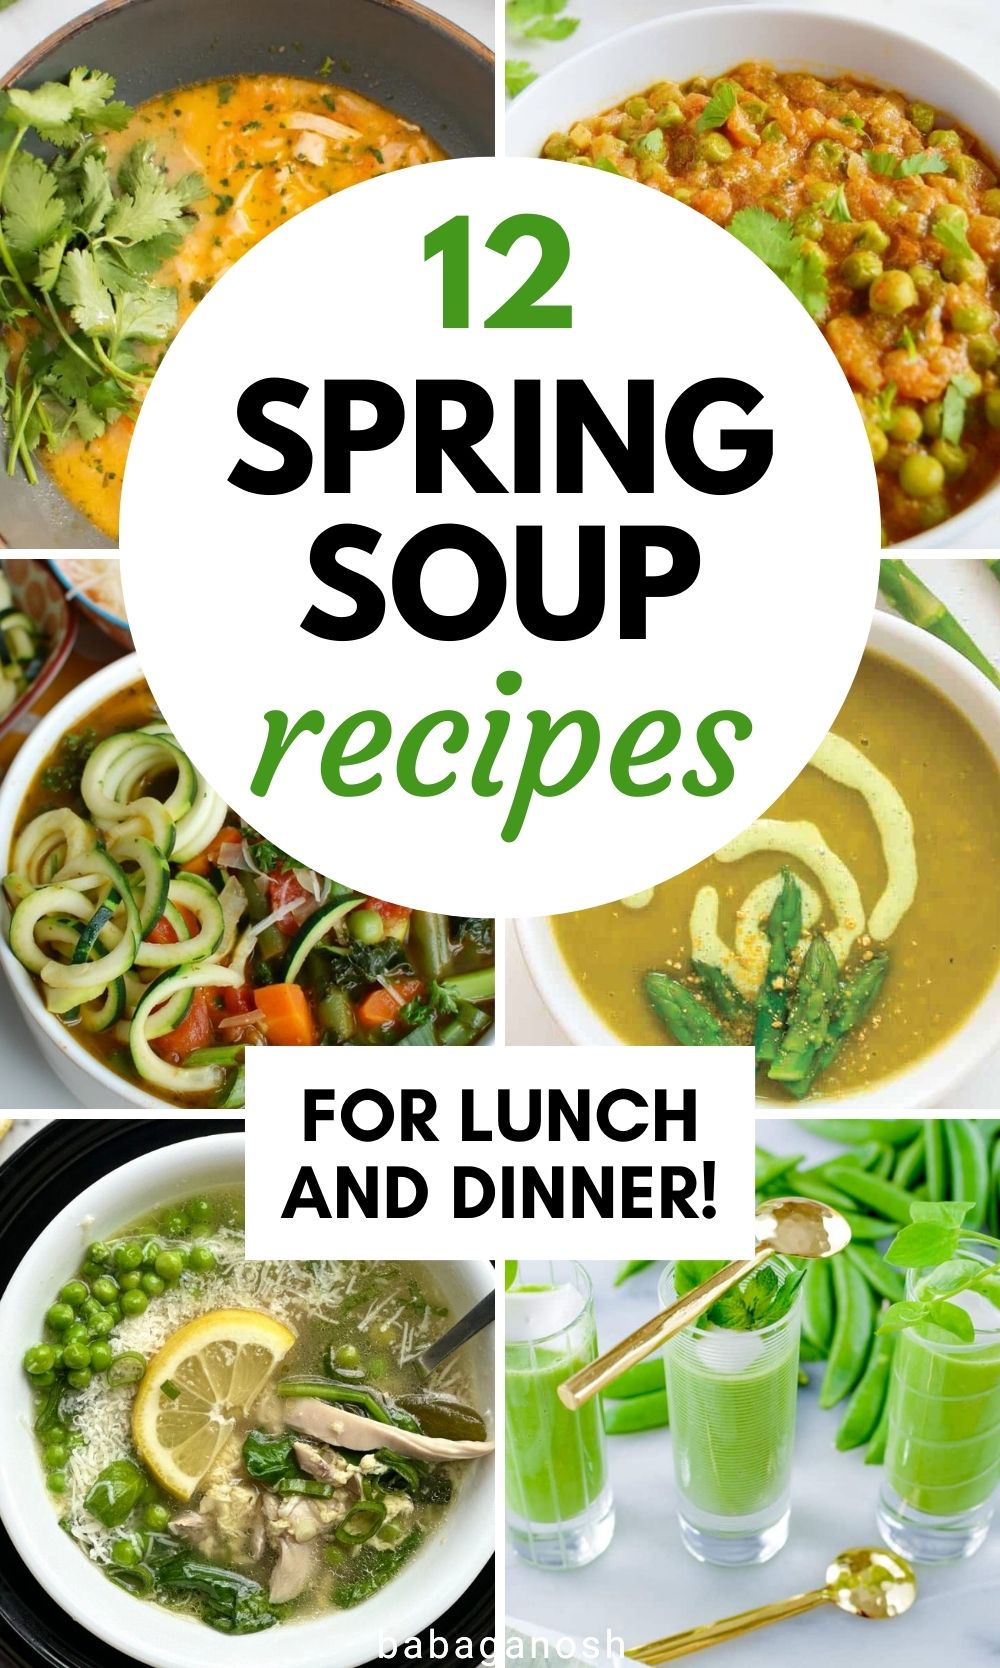 Pinterest graphic with text that reads "12 Spring Soup Recipes" and a collage of soups.